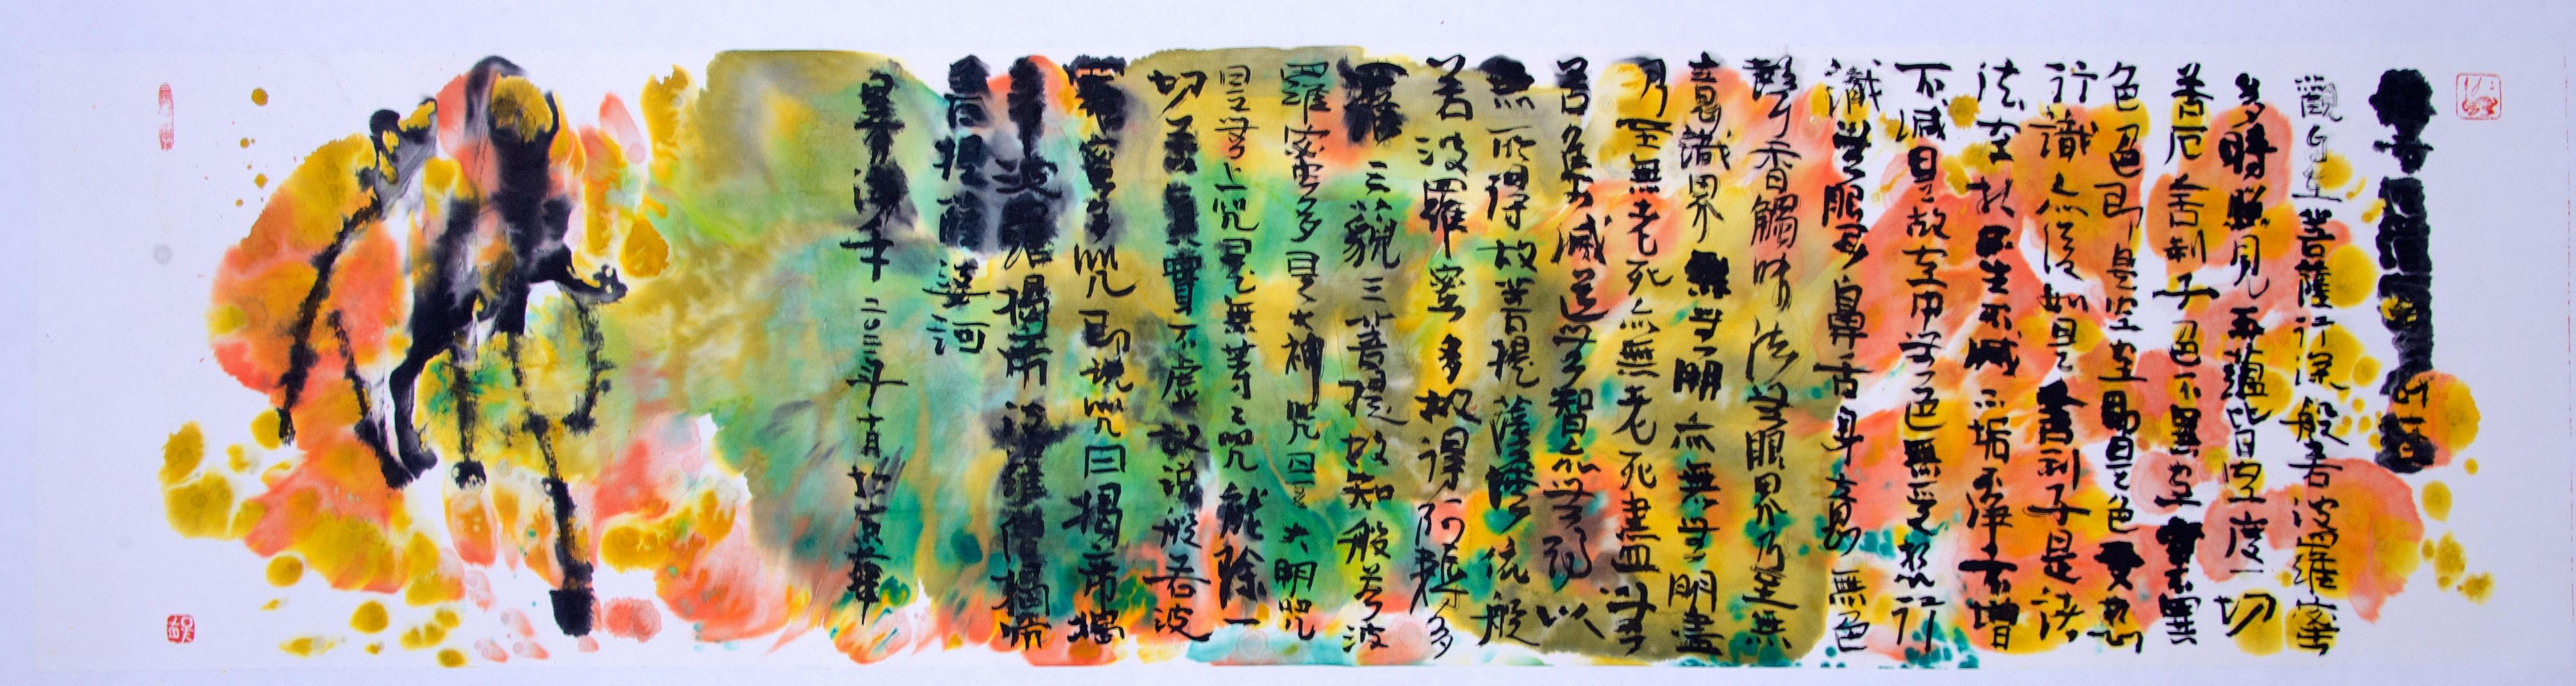 Chinese Contemporary Art by Wu You - Heart Sutra Floating in the World